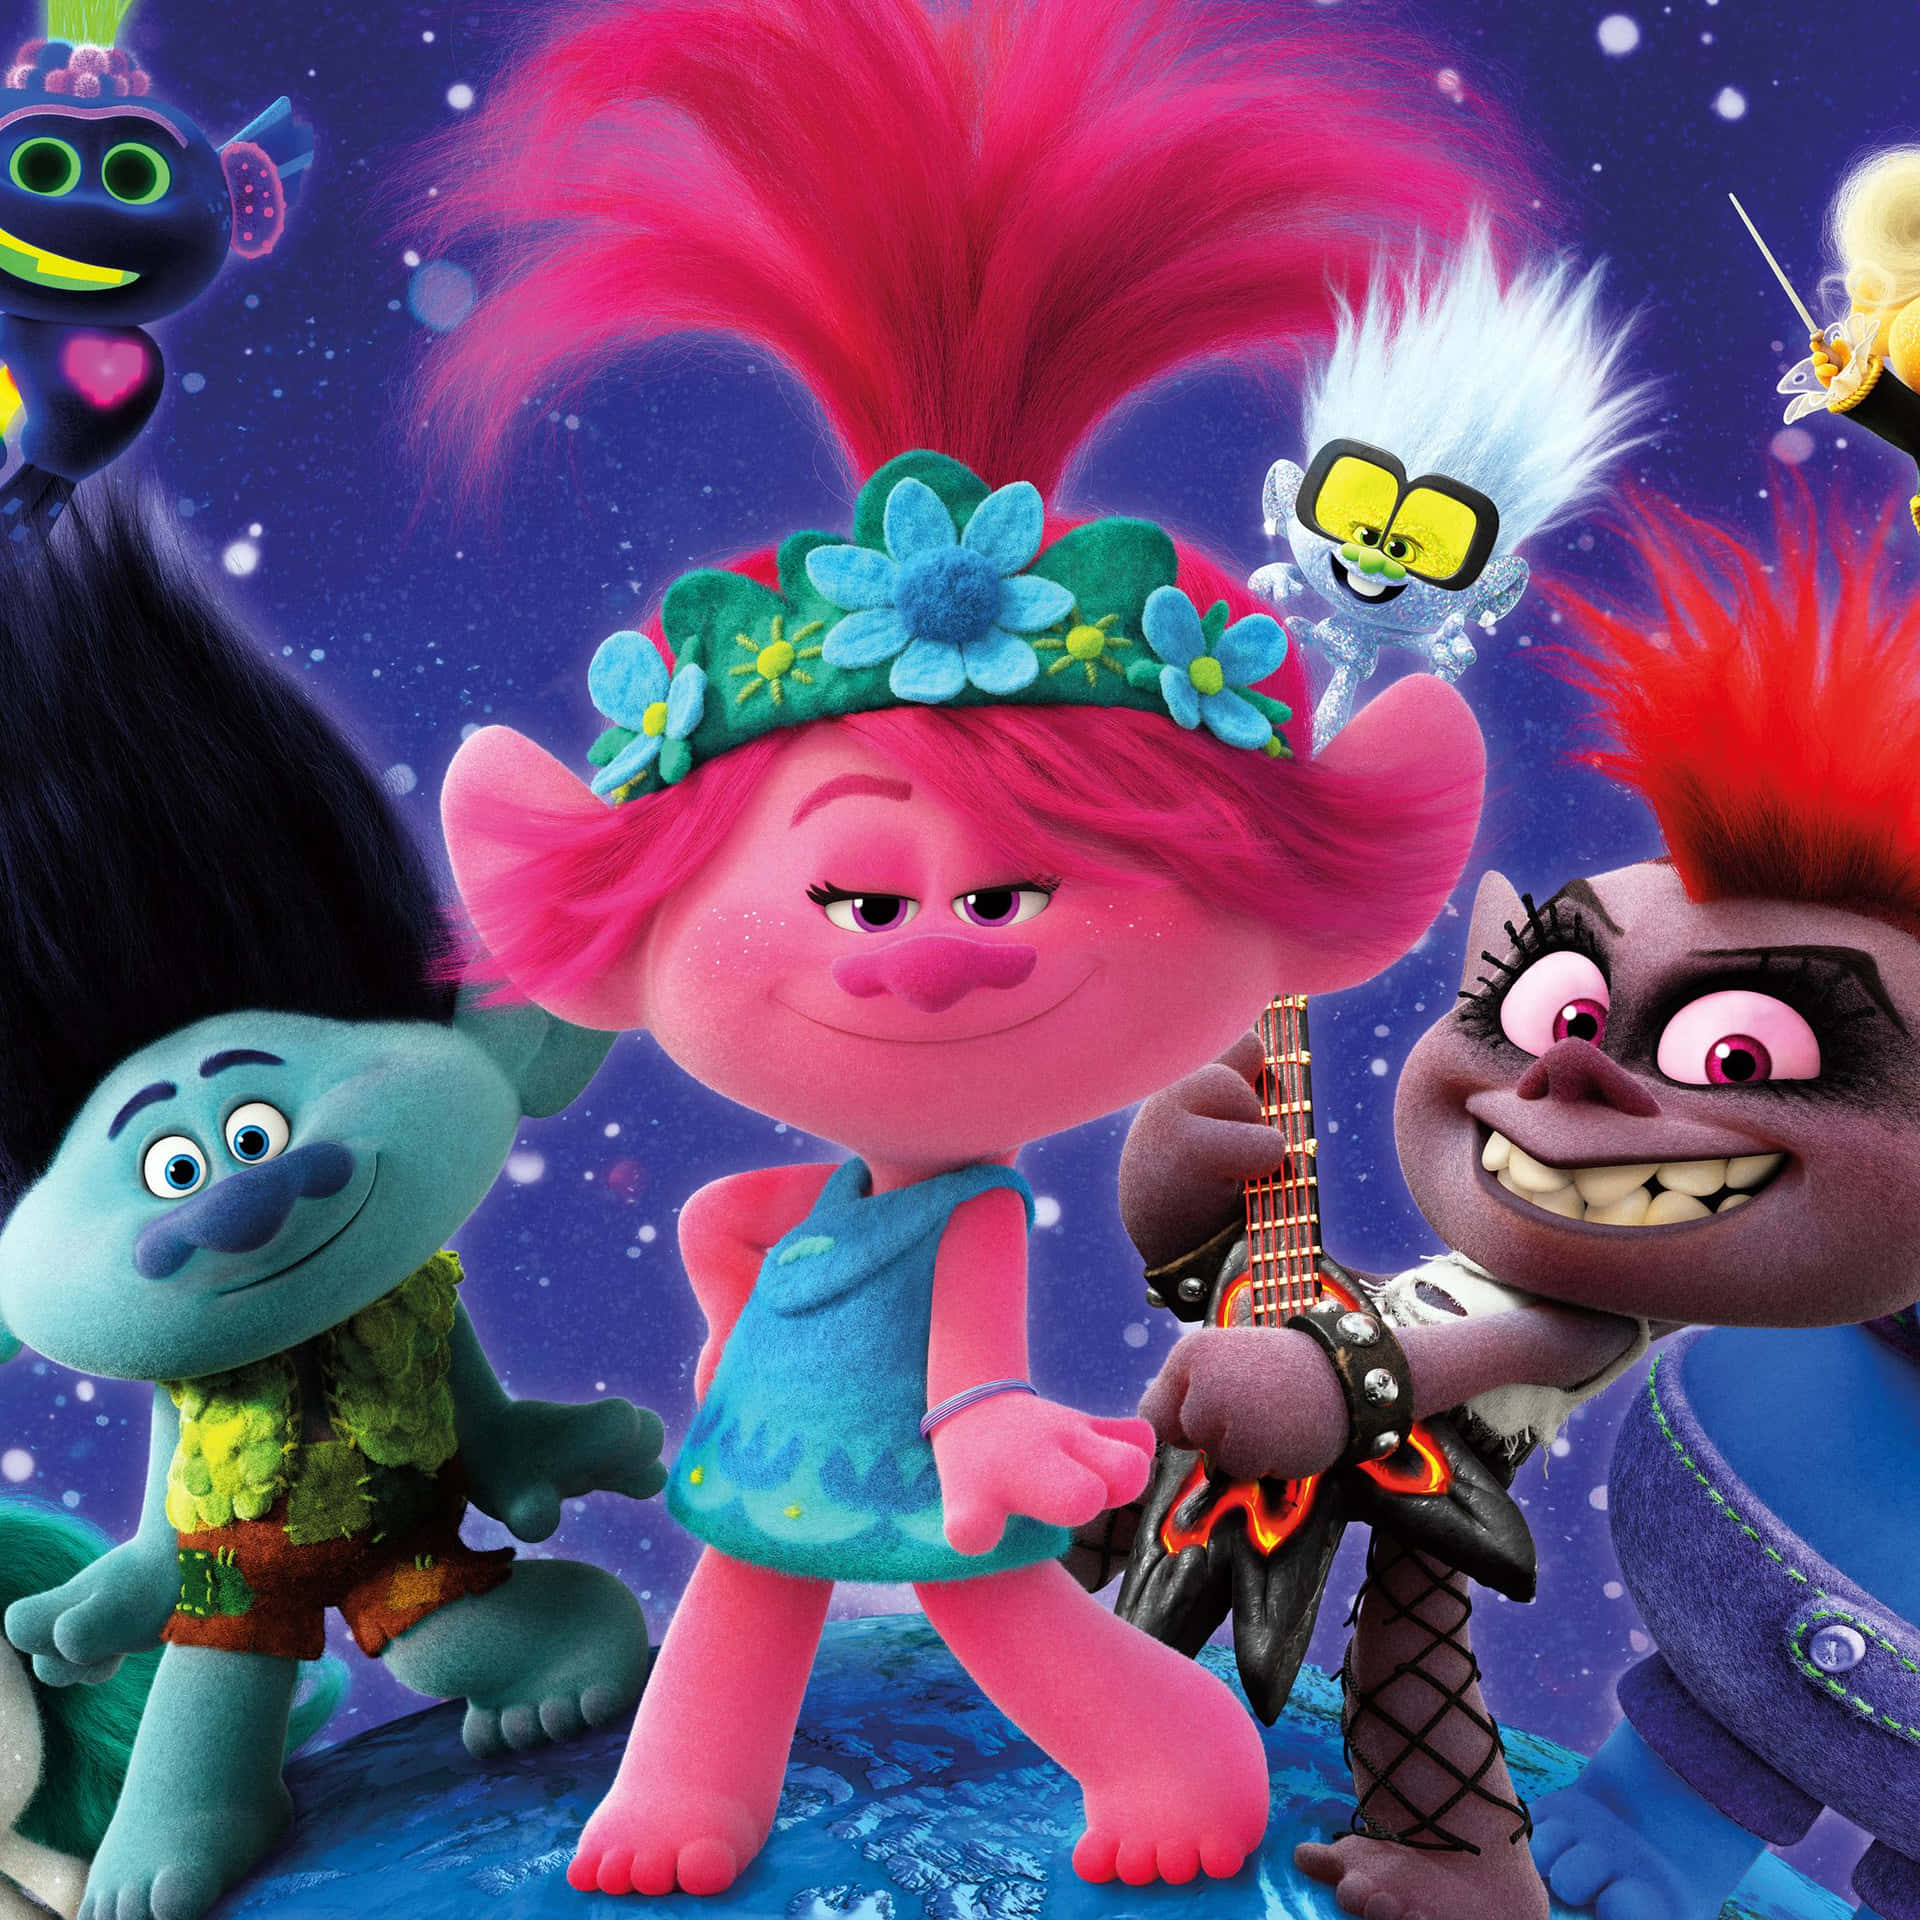 Trolls Movie Poster With A Group Of Characters Wallpaper